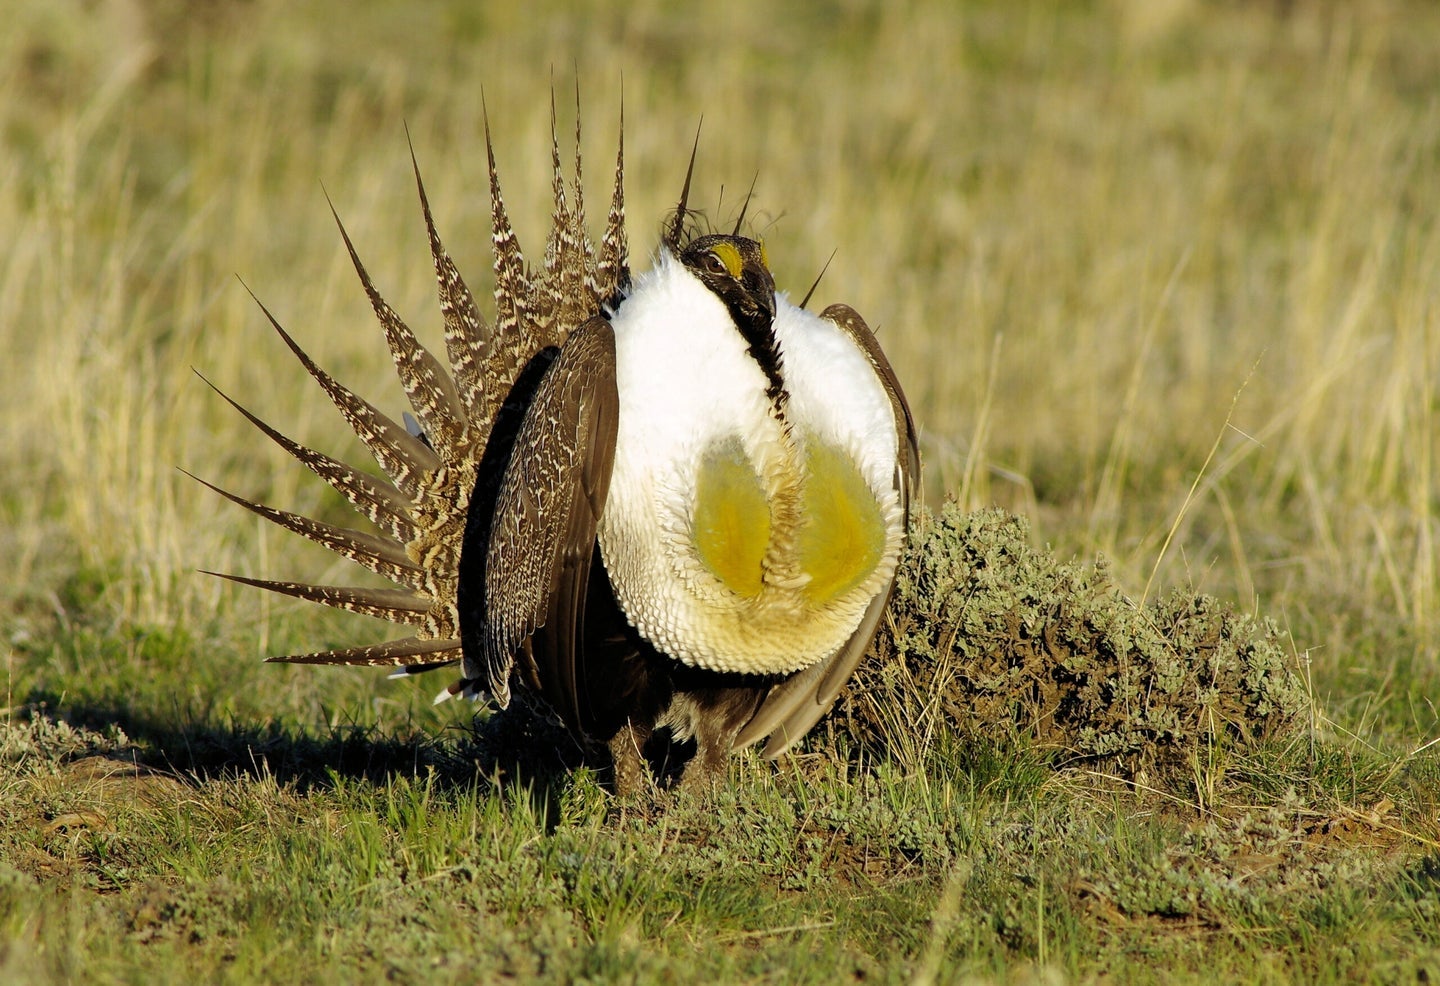 Male greater sage-grouse bird with air sacs on display in grassland habitat